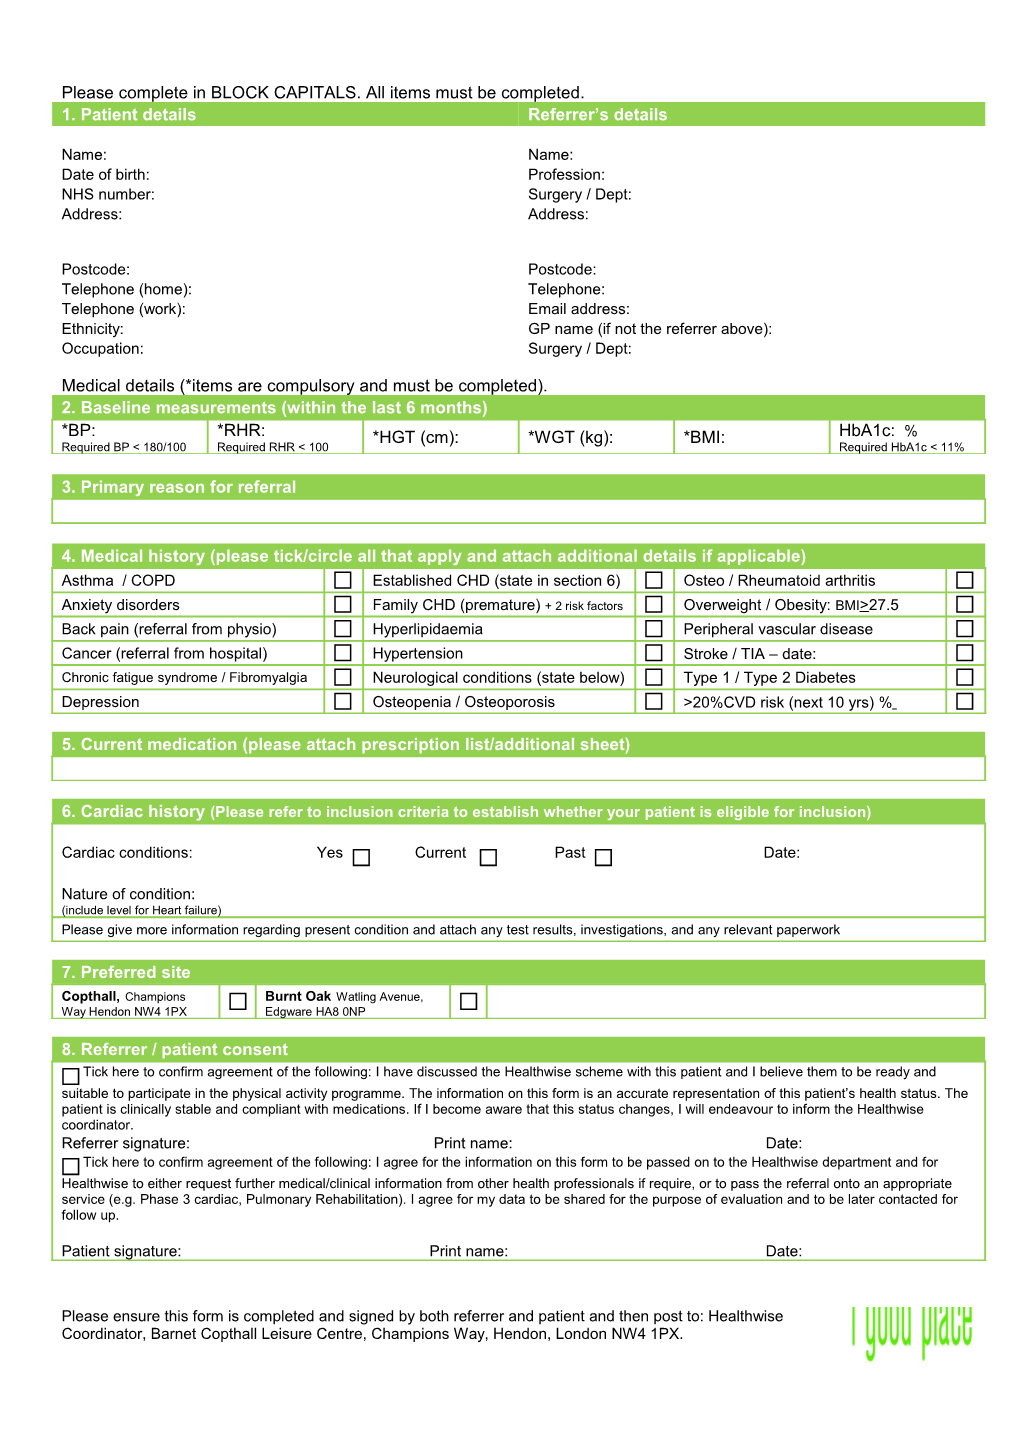 Healthwise Referral Form